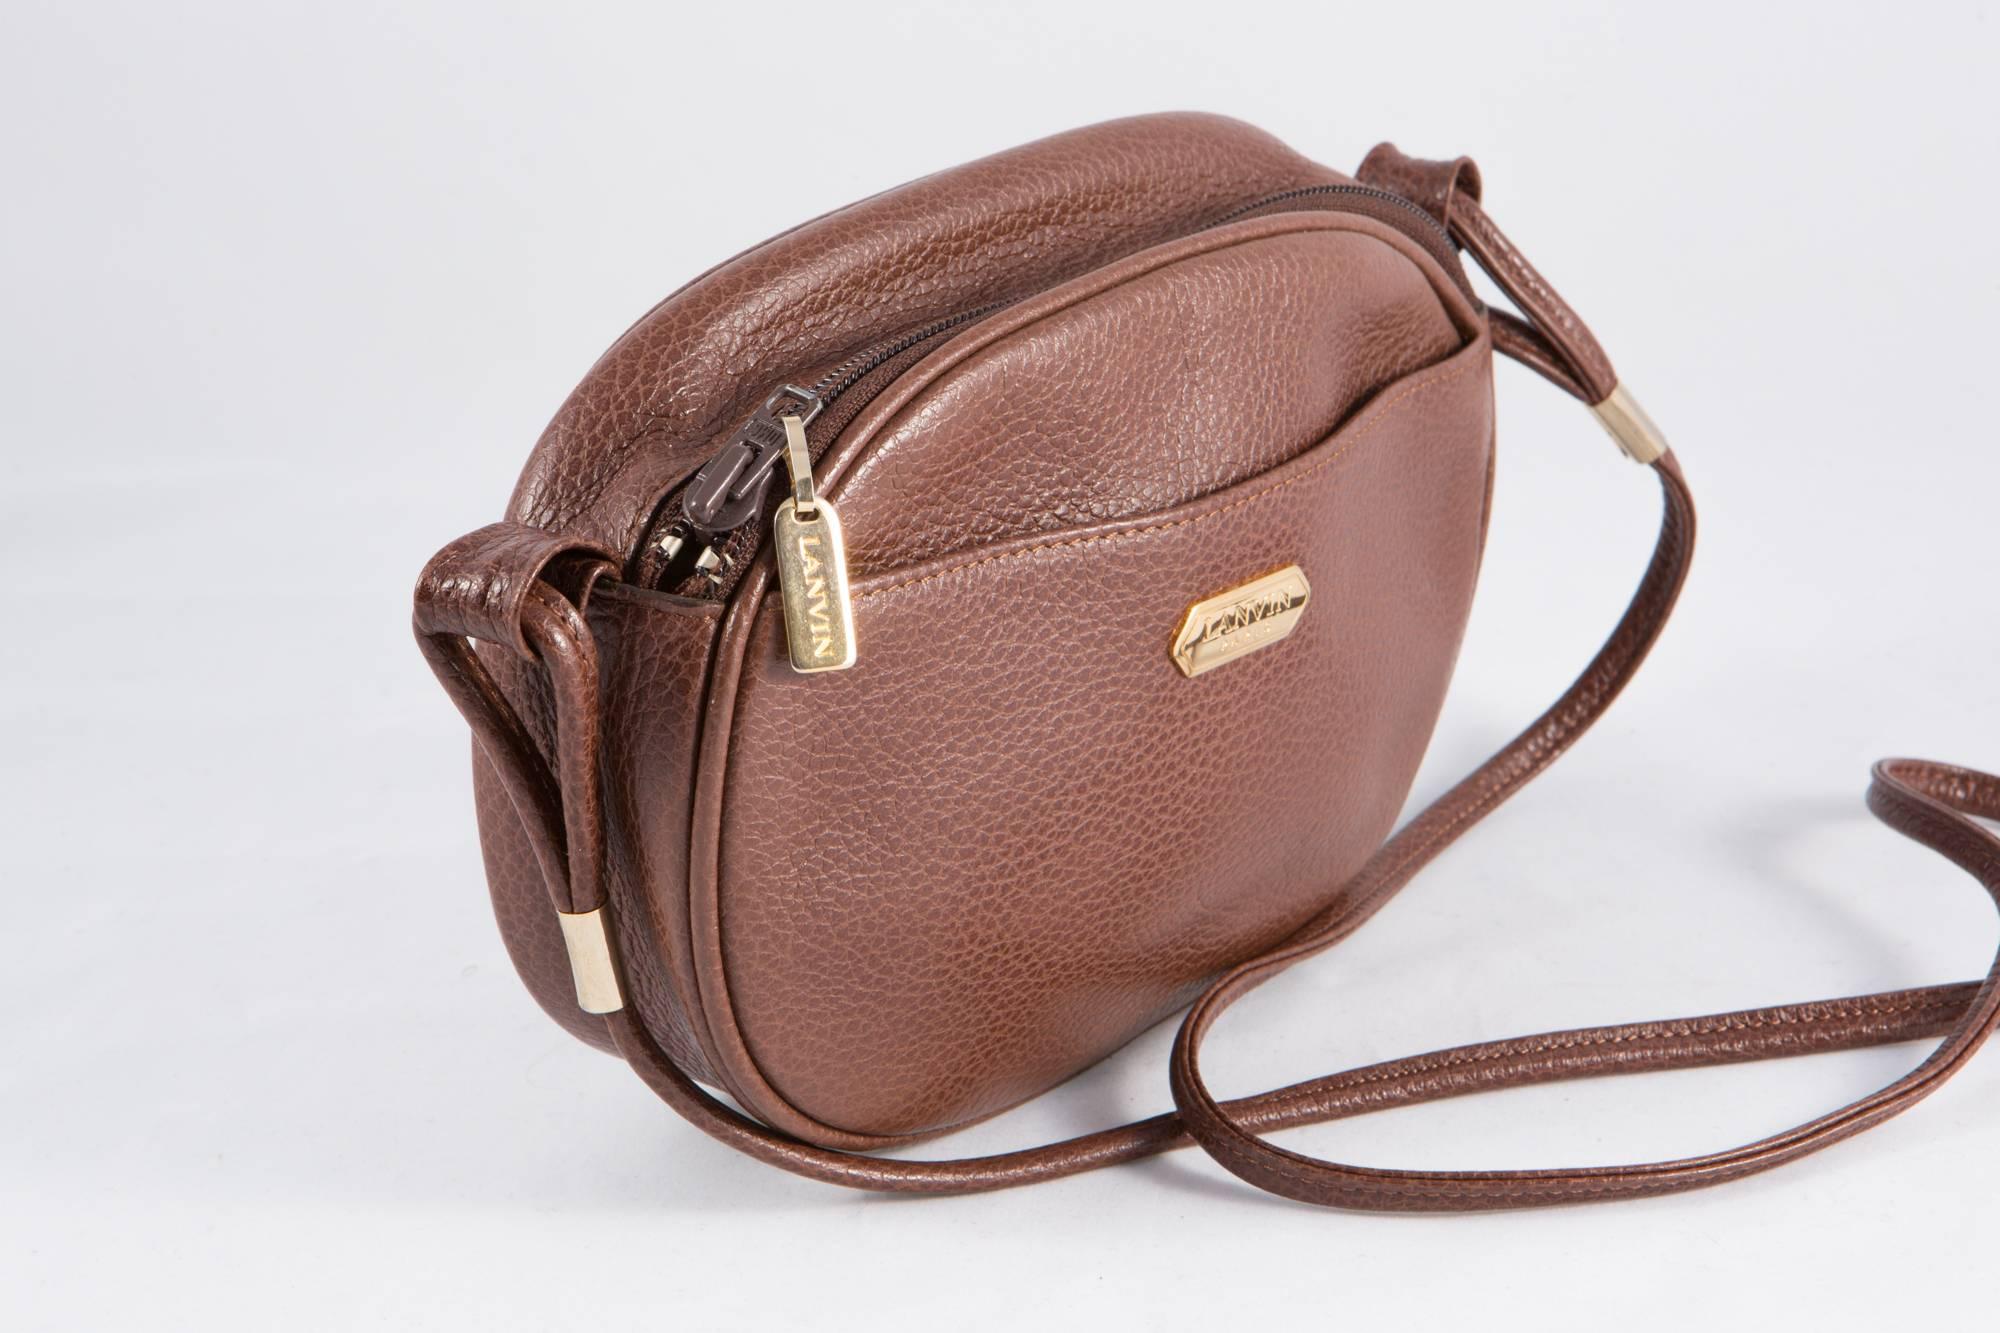 Lanvin small nut leather shoulder bag featuring a top zip opening, a front pocket, a gold tone front logo plaque.  
In excellent vintage condition. Made in Italy.
Measurements:7.8in. (20cm) X 5.5in. (14cm) X Depth 1.9in. (5cm)
Total Handle: 39.3 in.